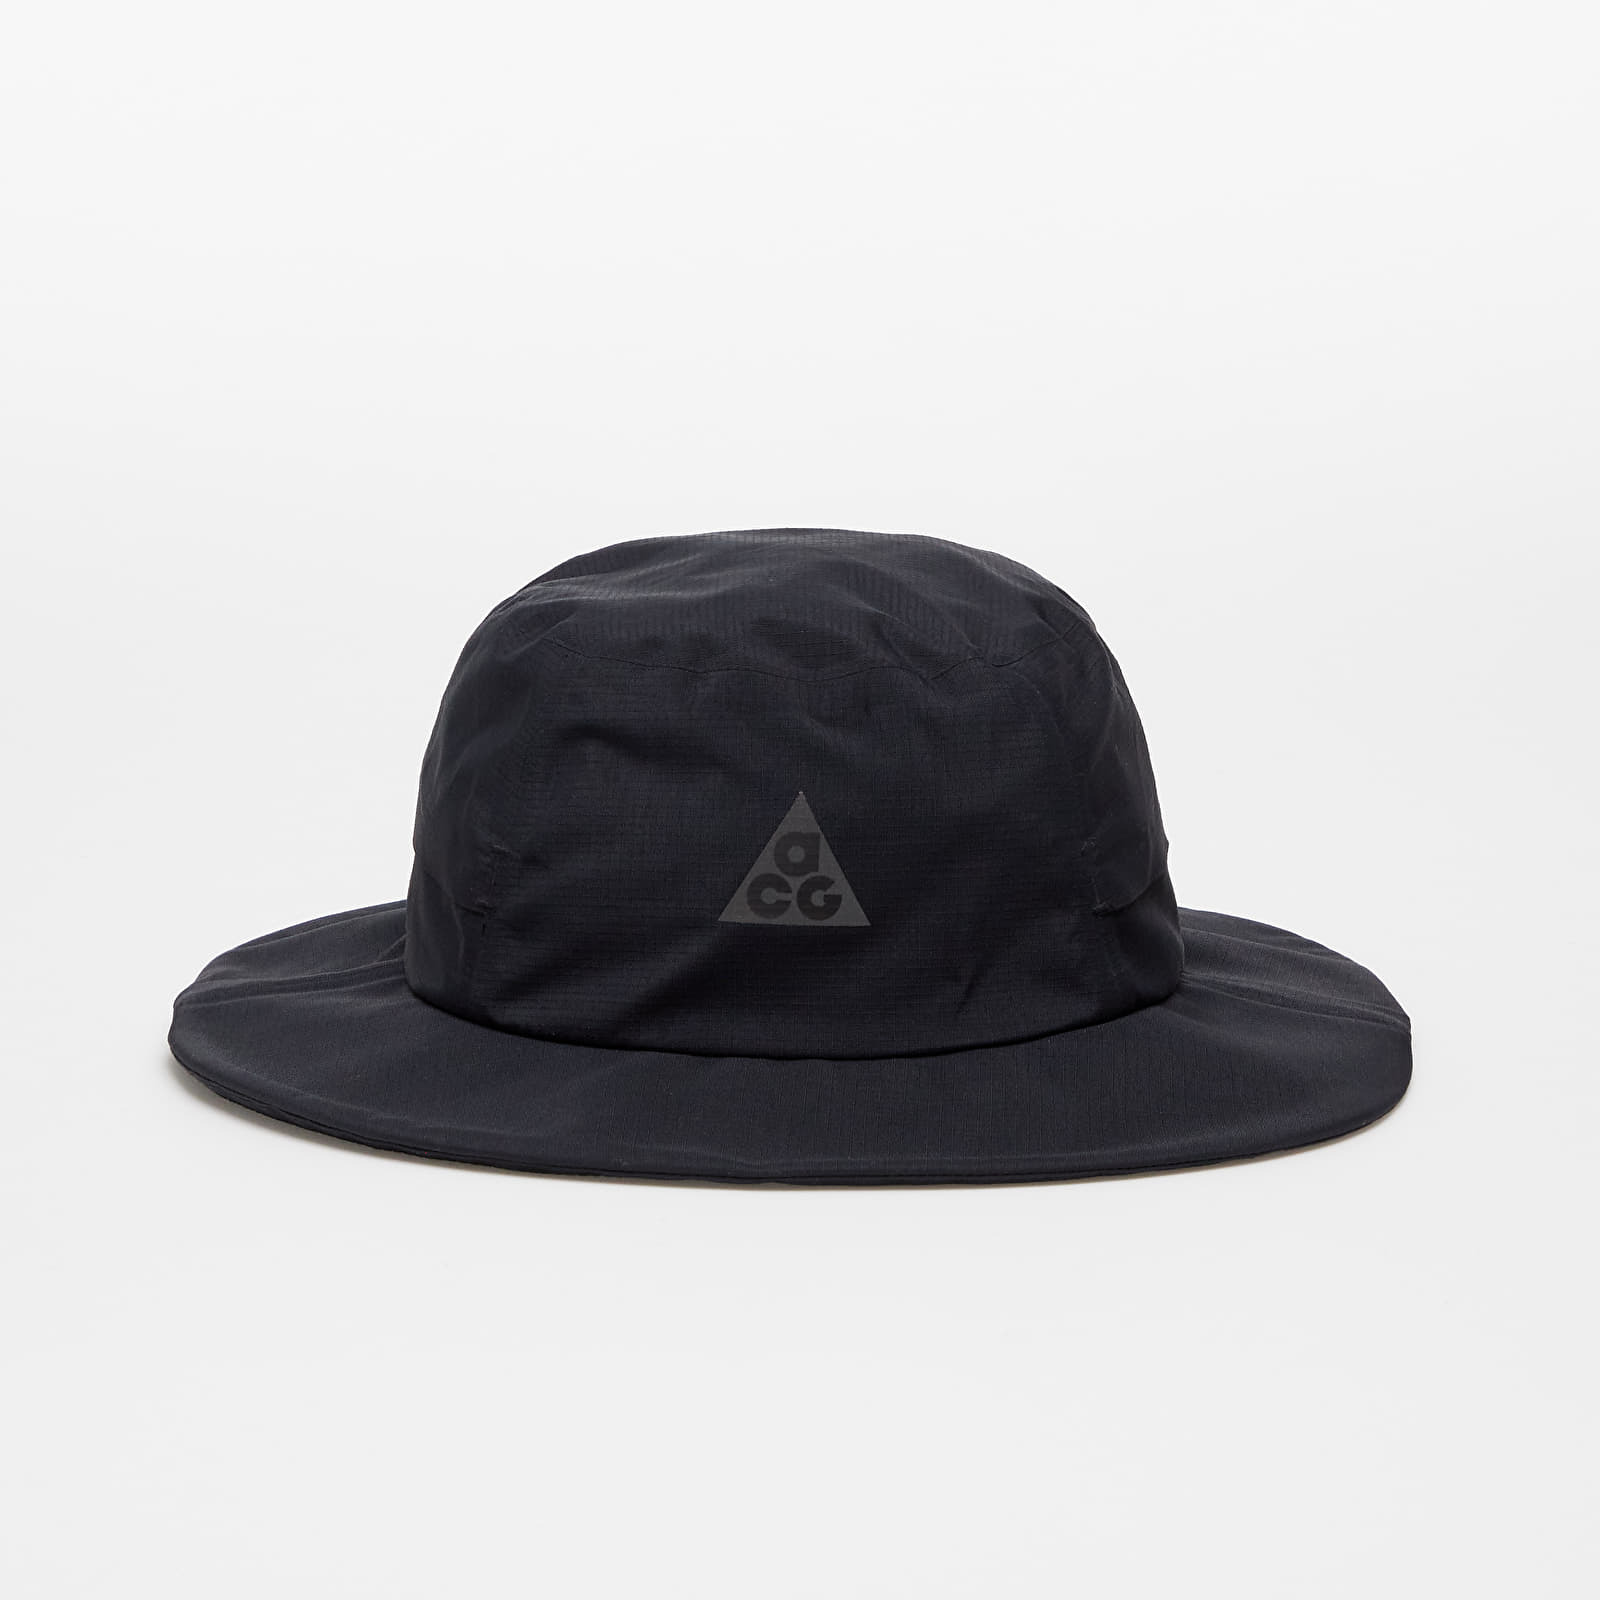 Nike - acg storm-fit bucket hat black/ anthracite